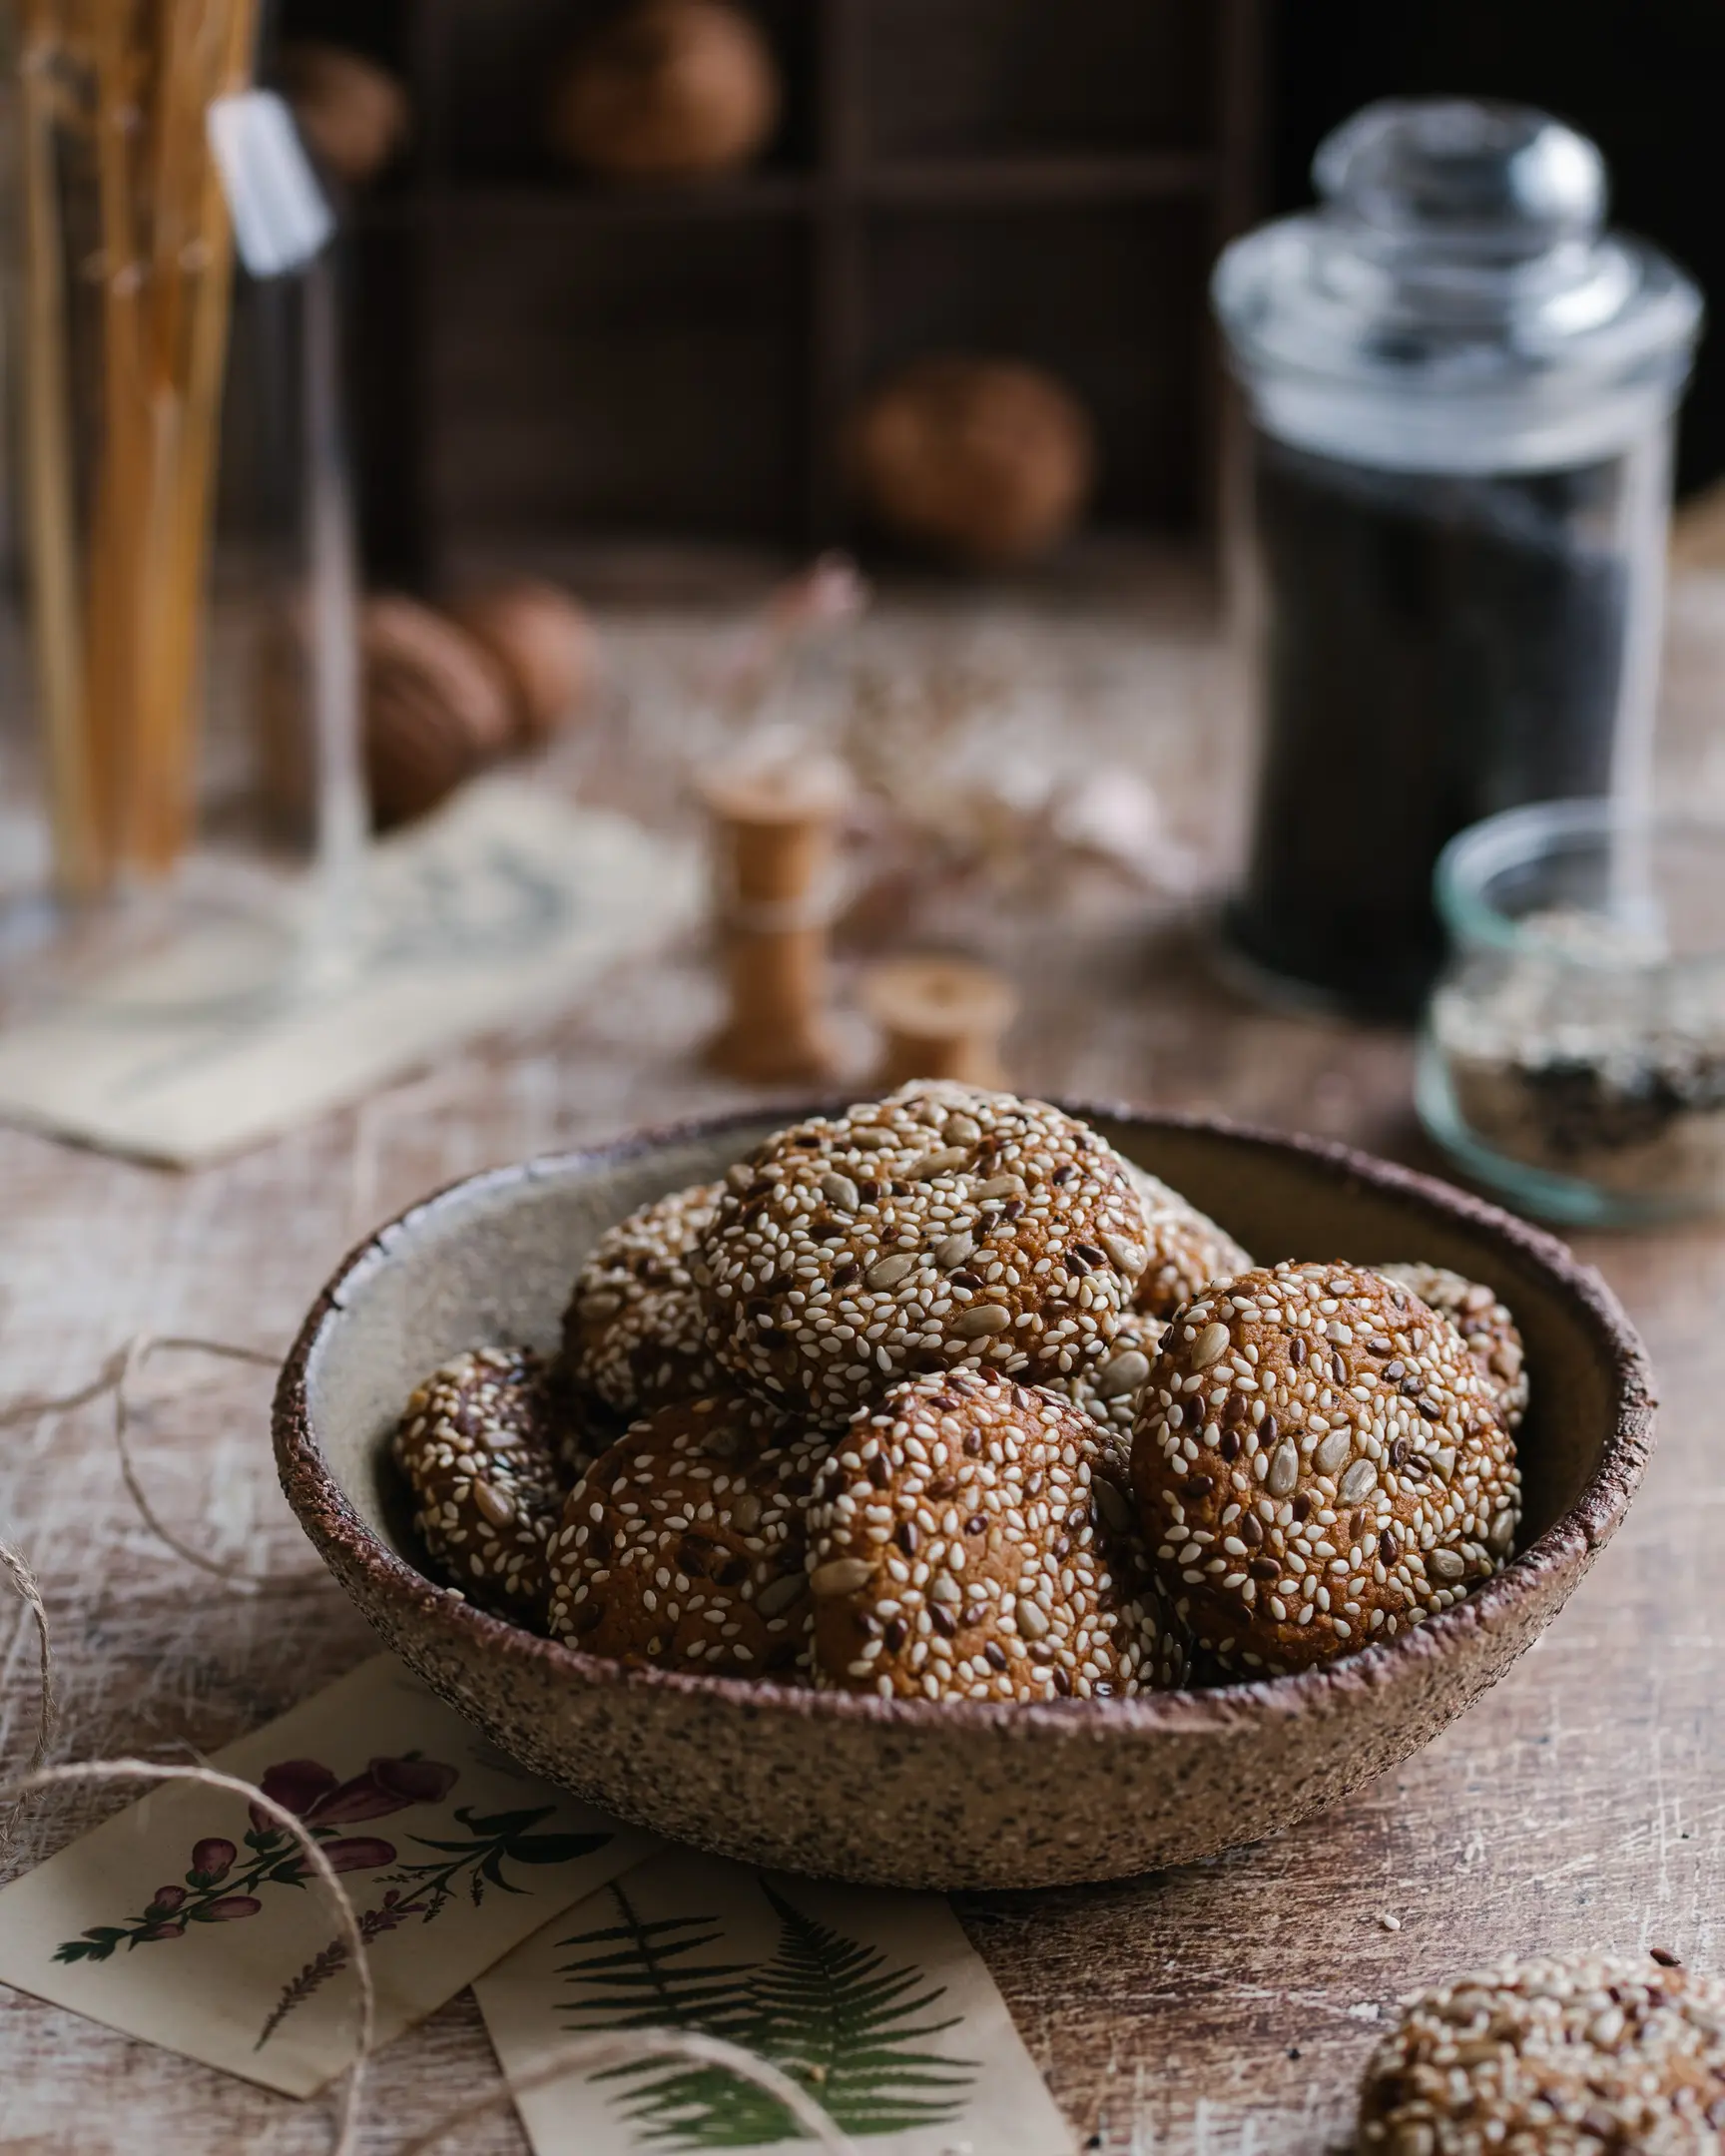 Vegan tahini cookies On the table is a plate full of cookies. Cookies decorated with seeds. In the background is a jar of black sesame seeds and wooden elements.